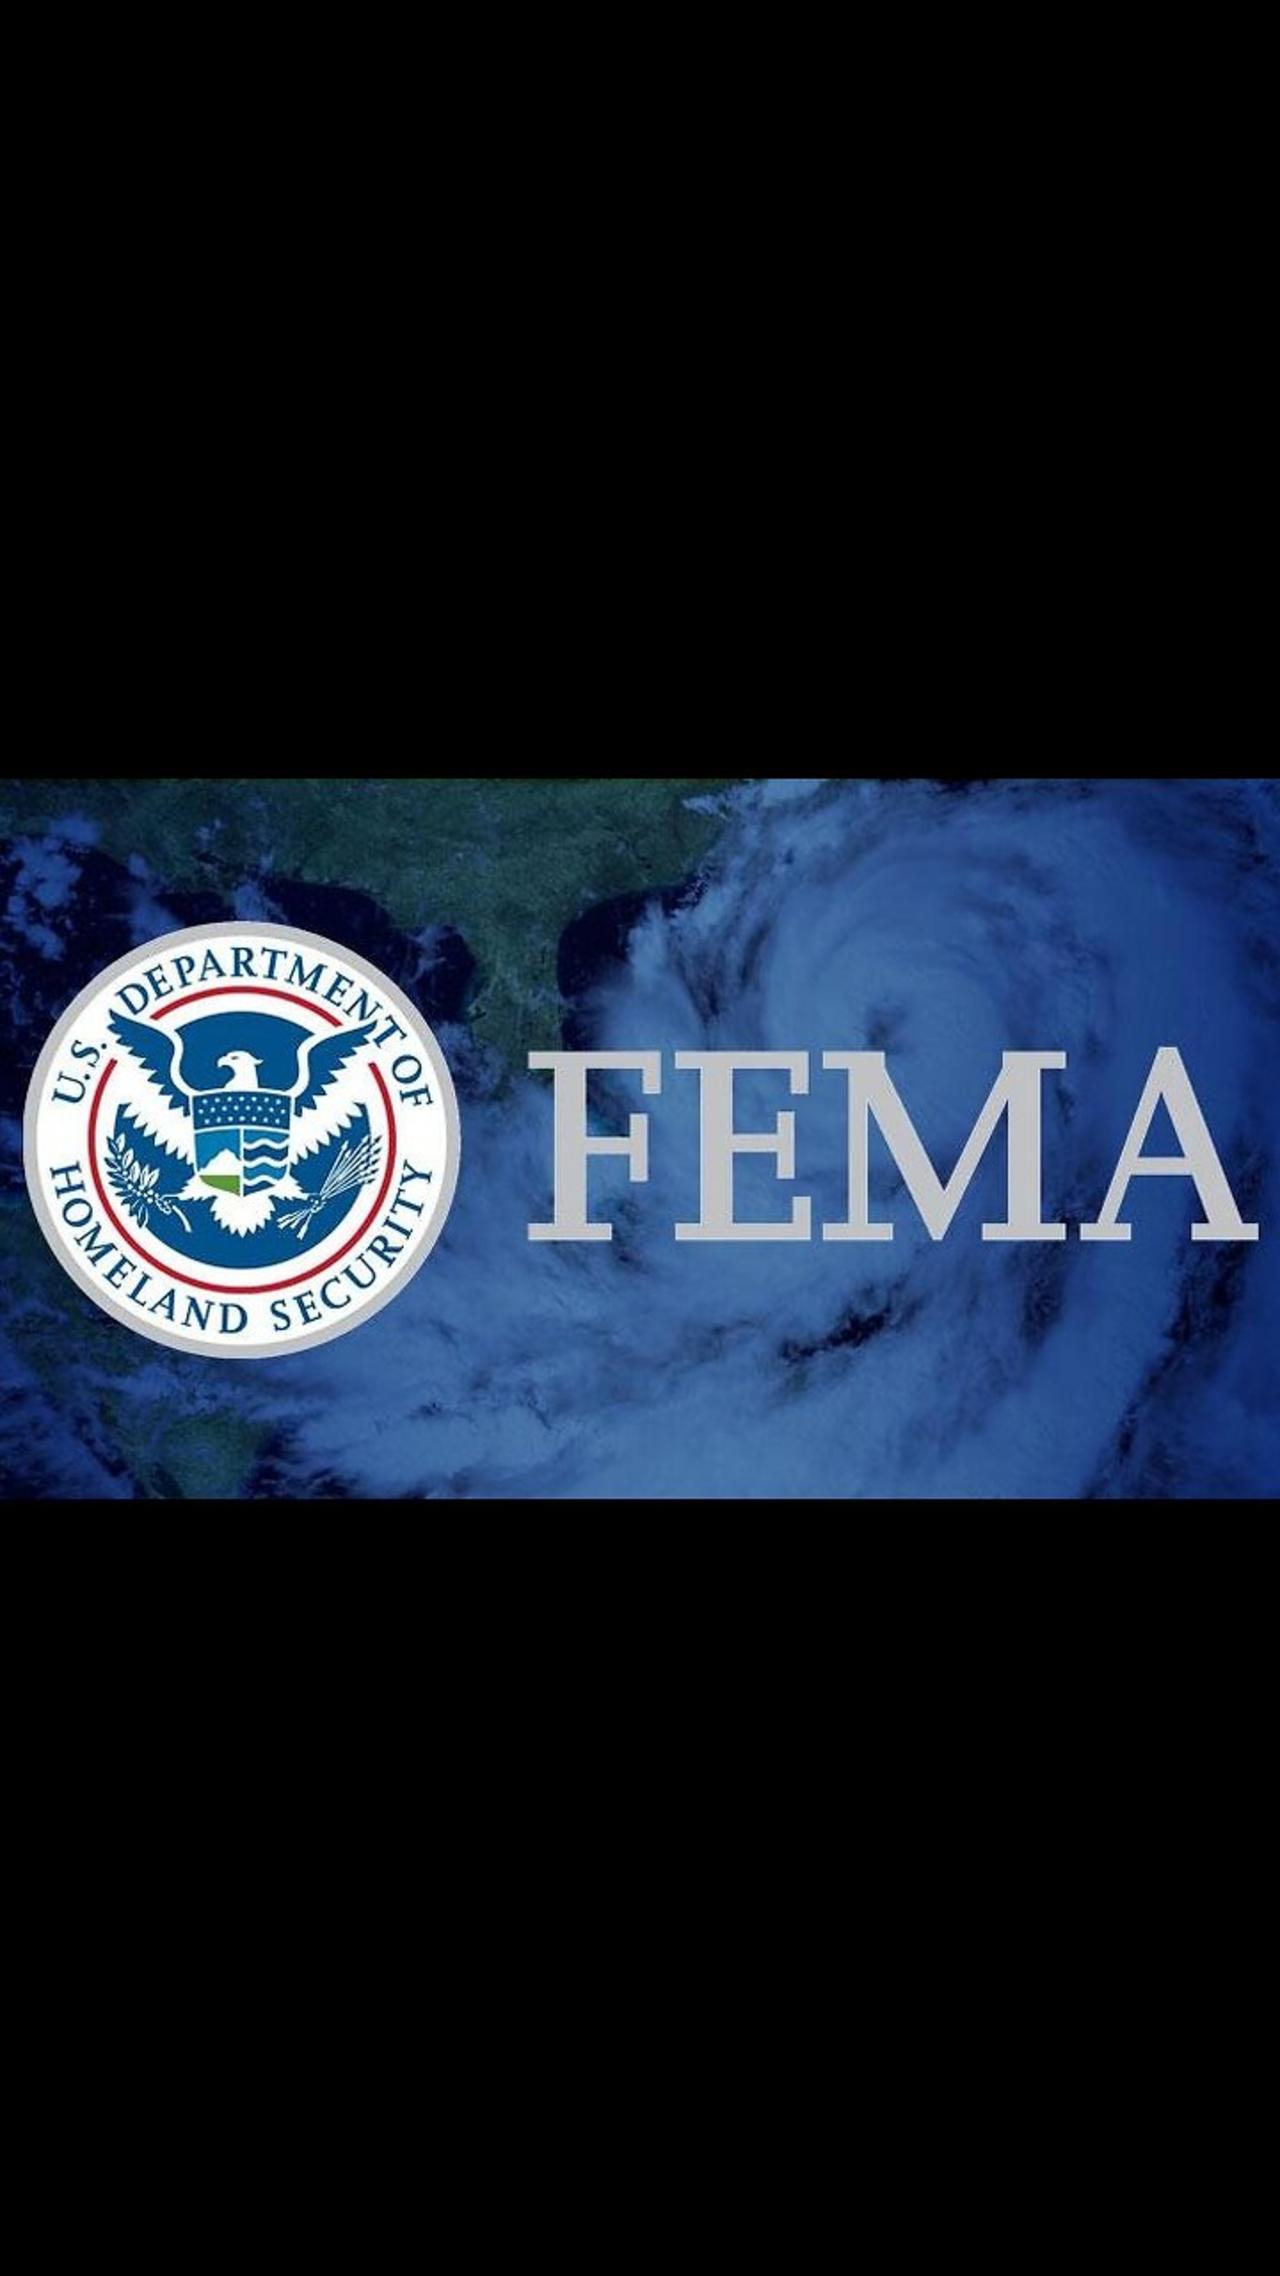 "DISASTERS INCOMING" - PROPHECY OF INTENSE NATURAL EVENTS, FEMA & CORRUPTION